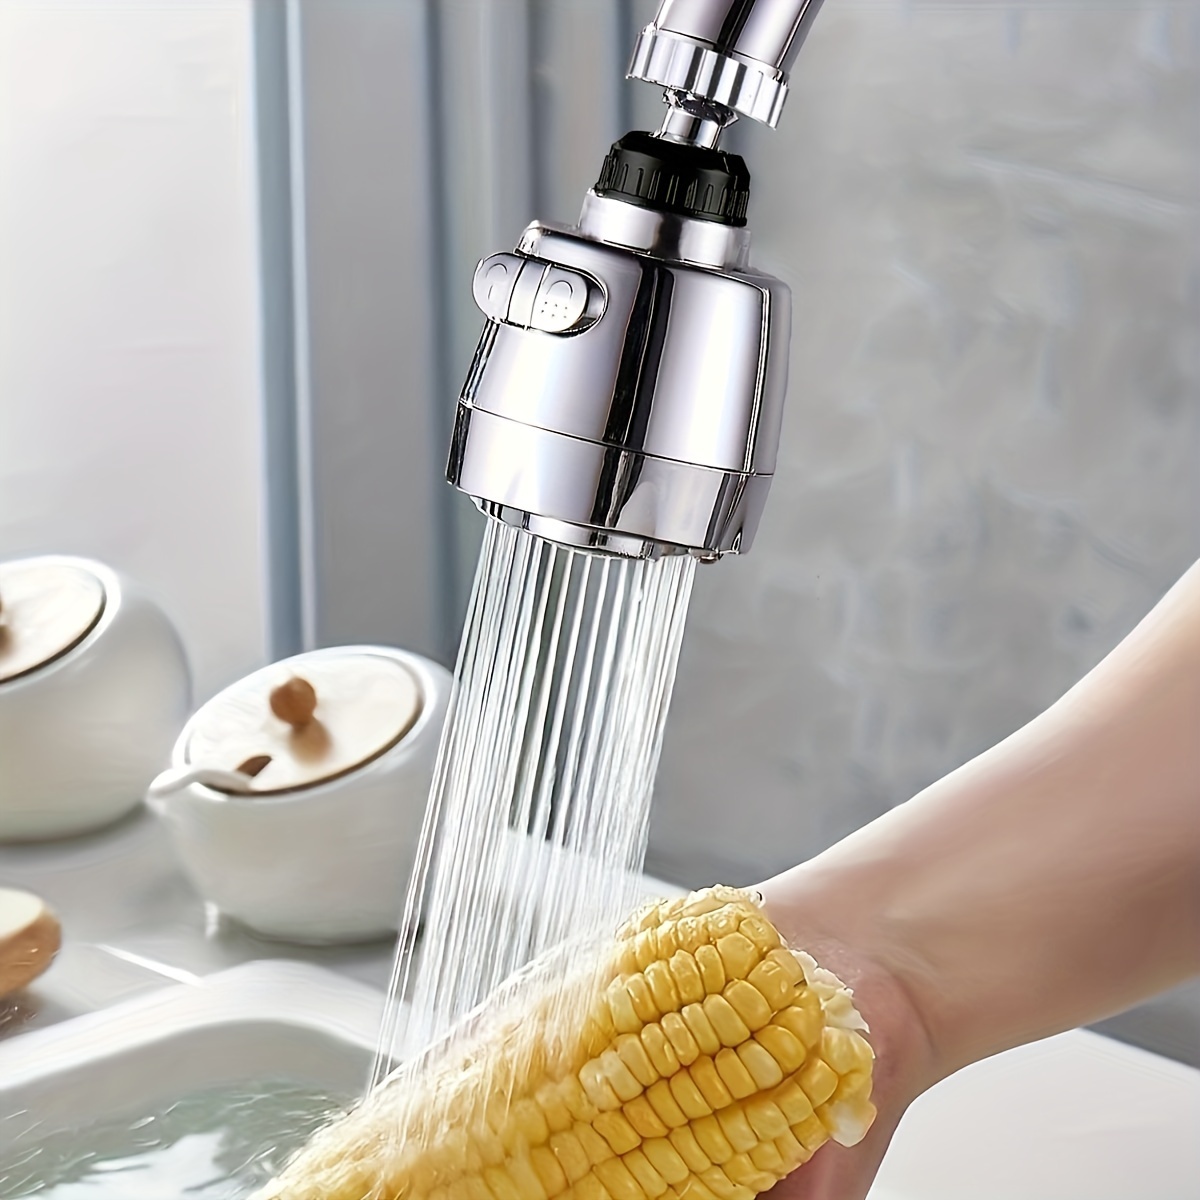 

1pc Aerator With 2 Short Gears, Universal Faucet Extender, Shower Booster Filter, Extension Aerator, Splash-proof Water-saving Extender